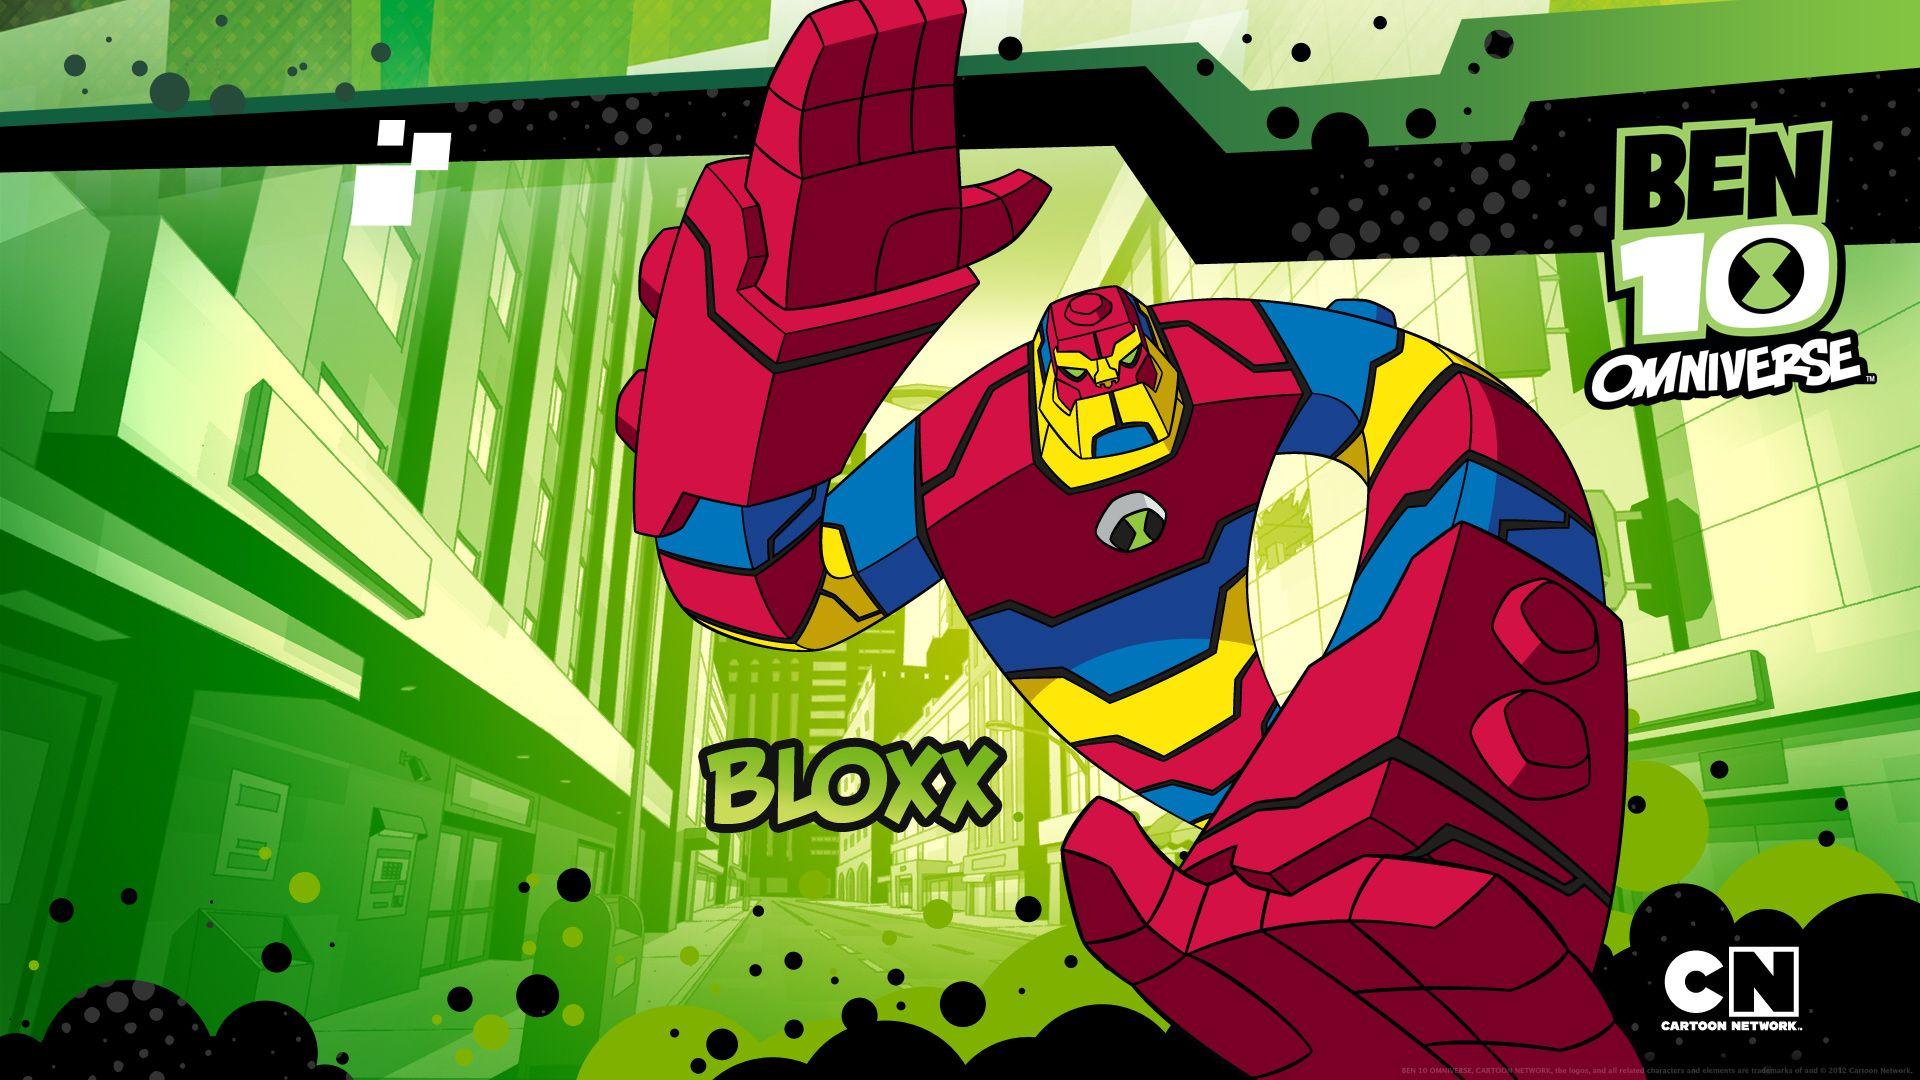 Ben 10 Omniverse image Bloxx HD wallpaper and background photo